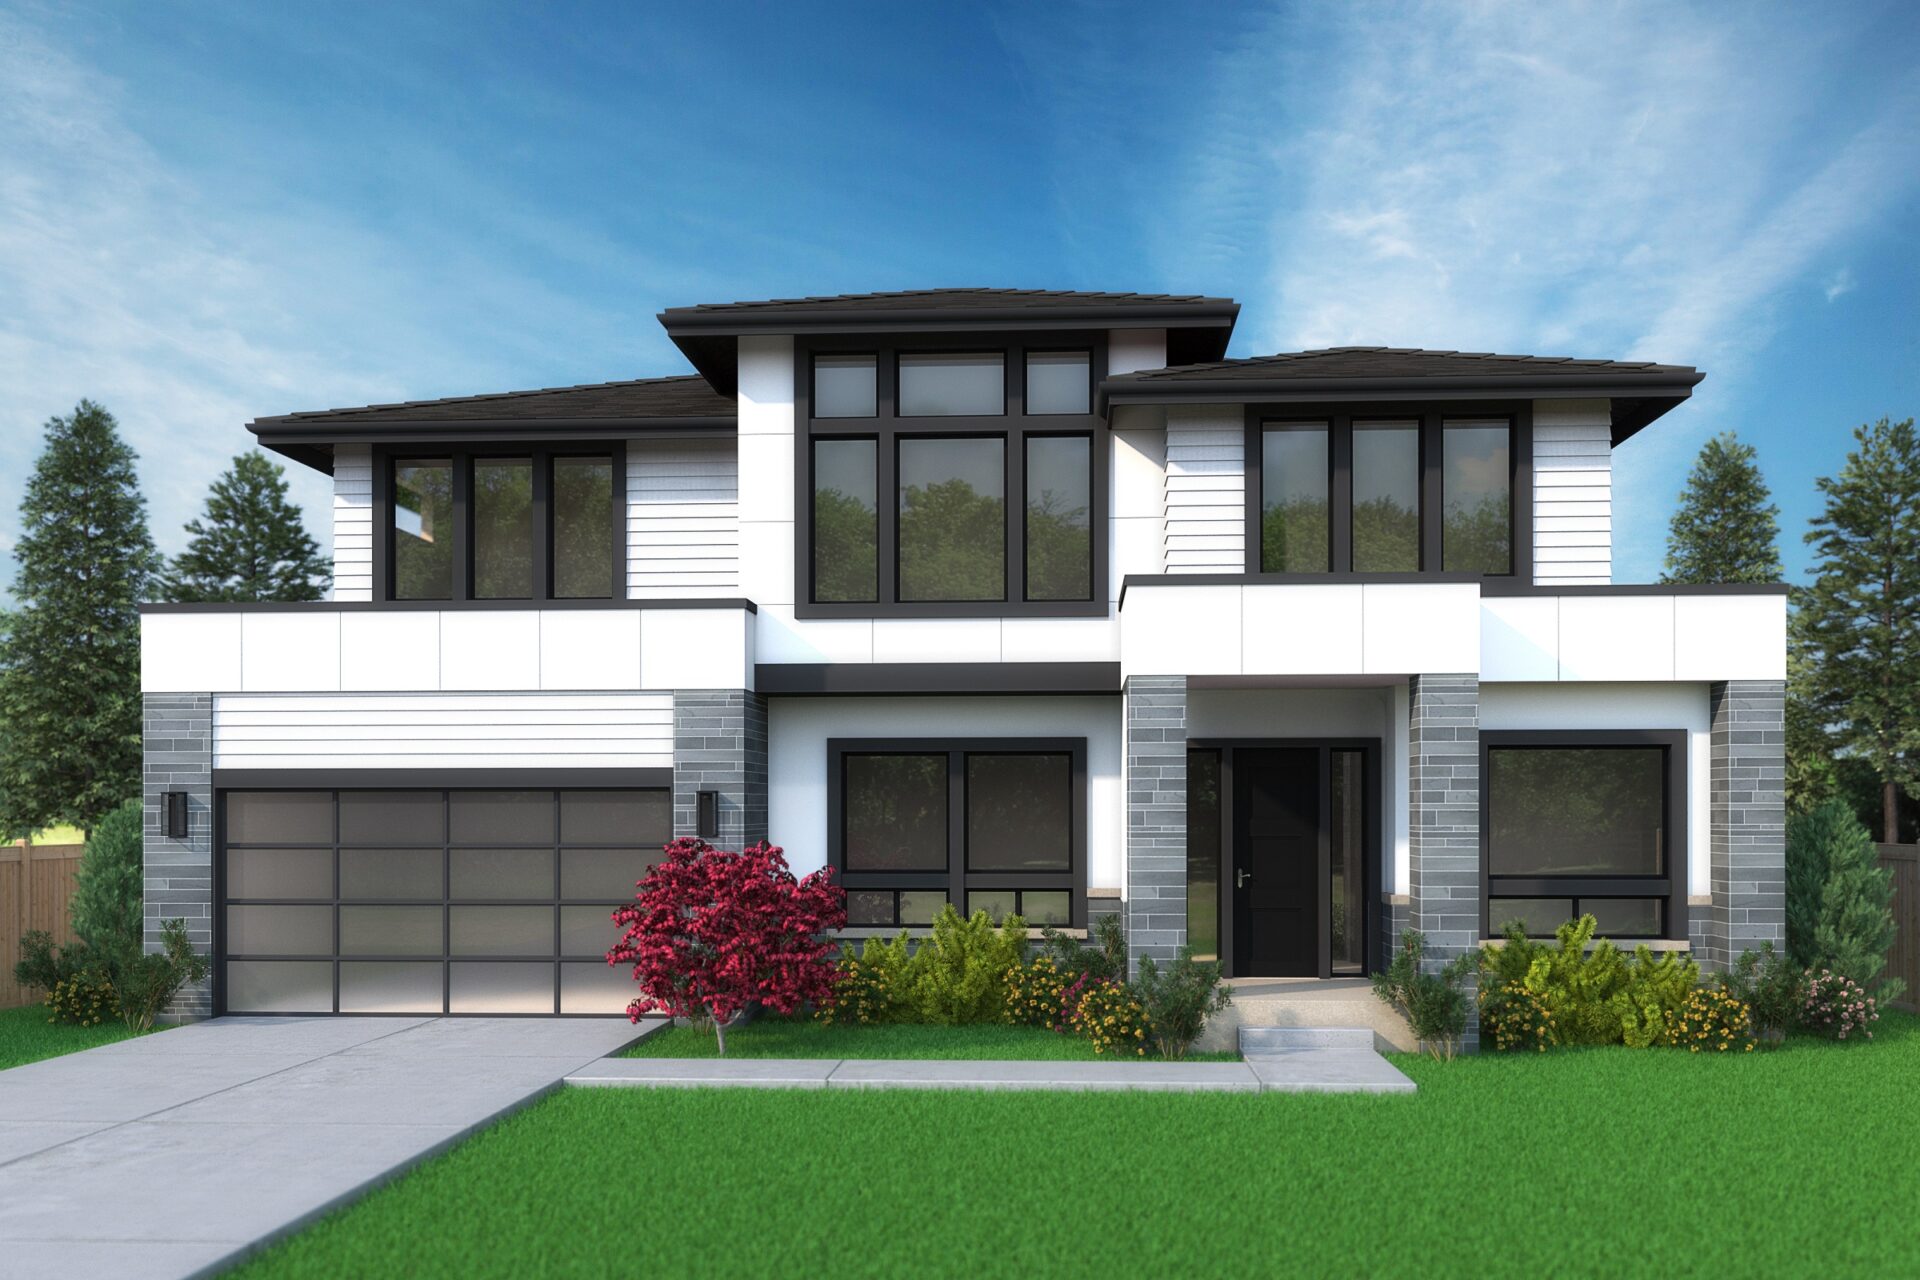 View our new luxury home construction on 410 155th Ave SE, in Bellevue, WA from MN Custom Homes